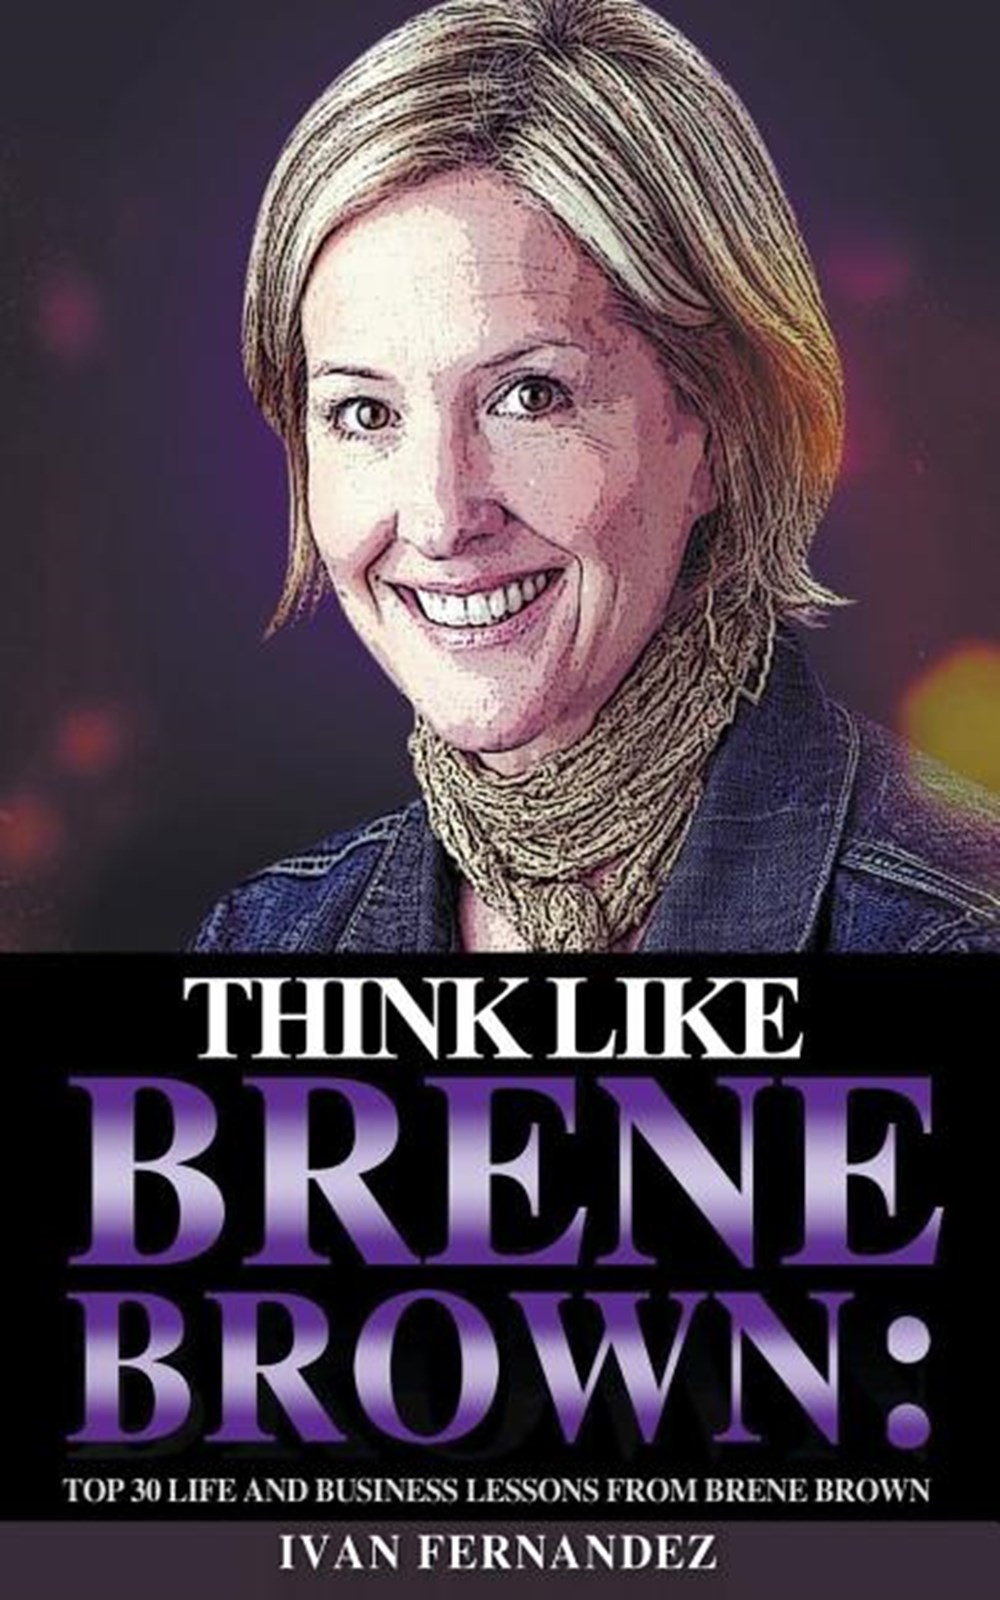 Think Like Brene Brown Top 30 Life and Business Lessons from Brene Brown